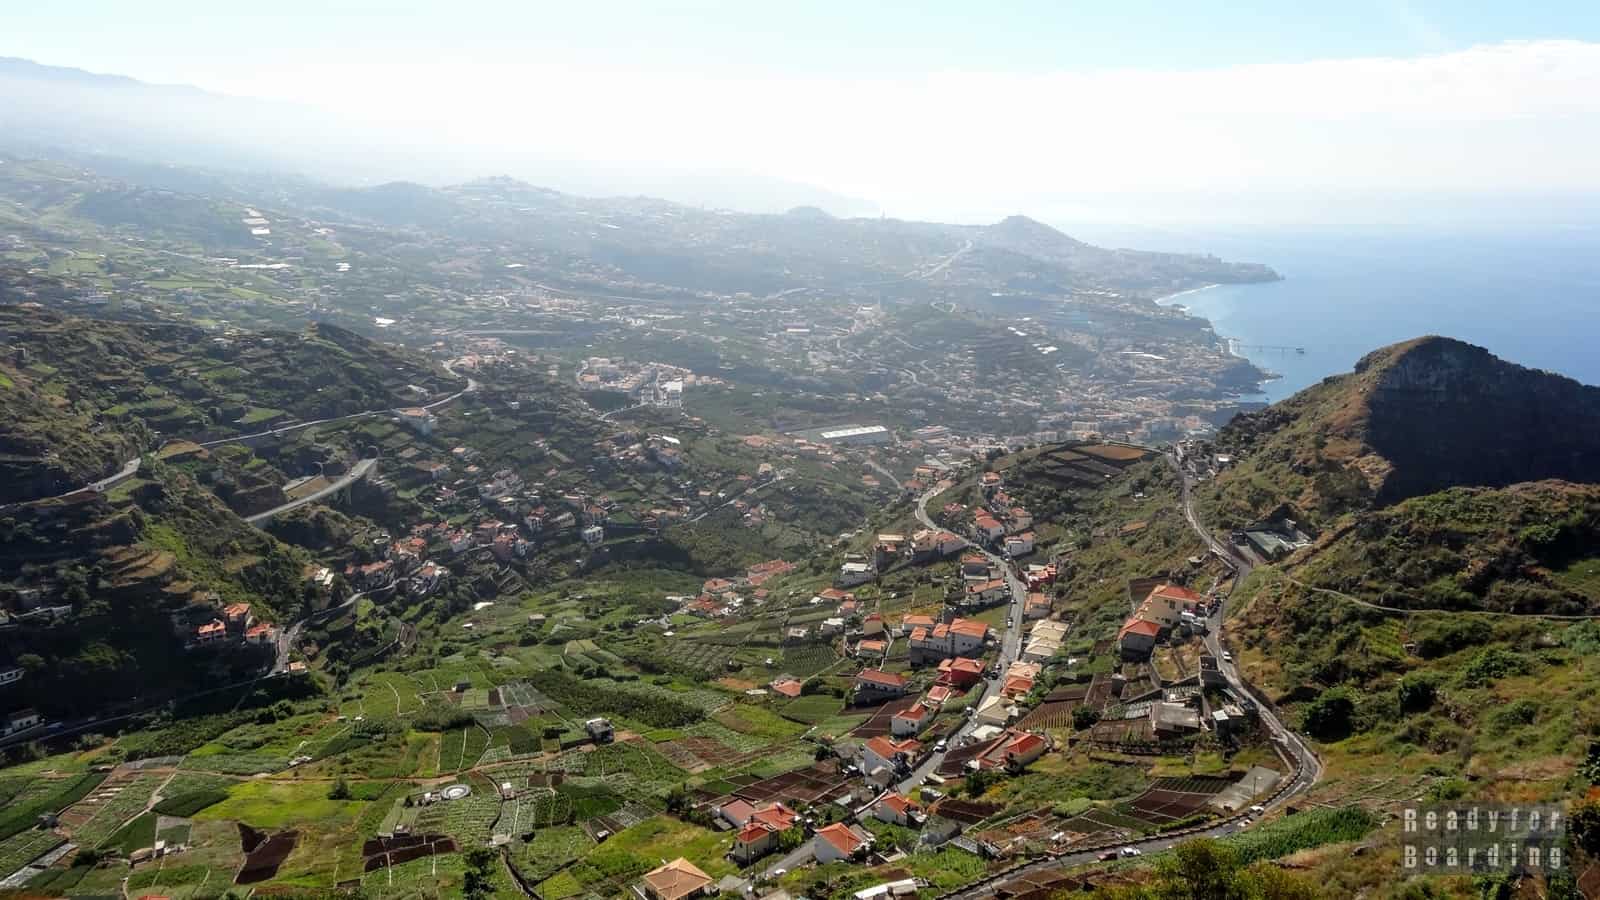 View of Funchal - Madeira